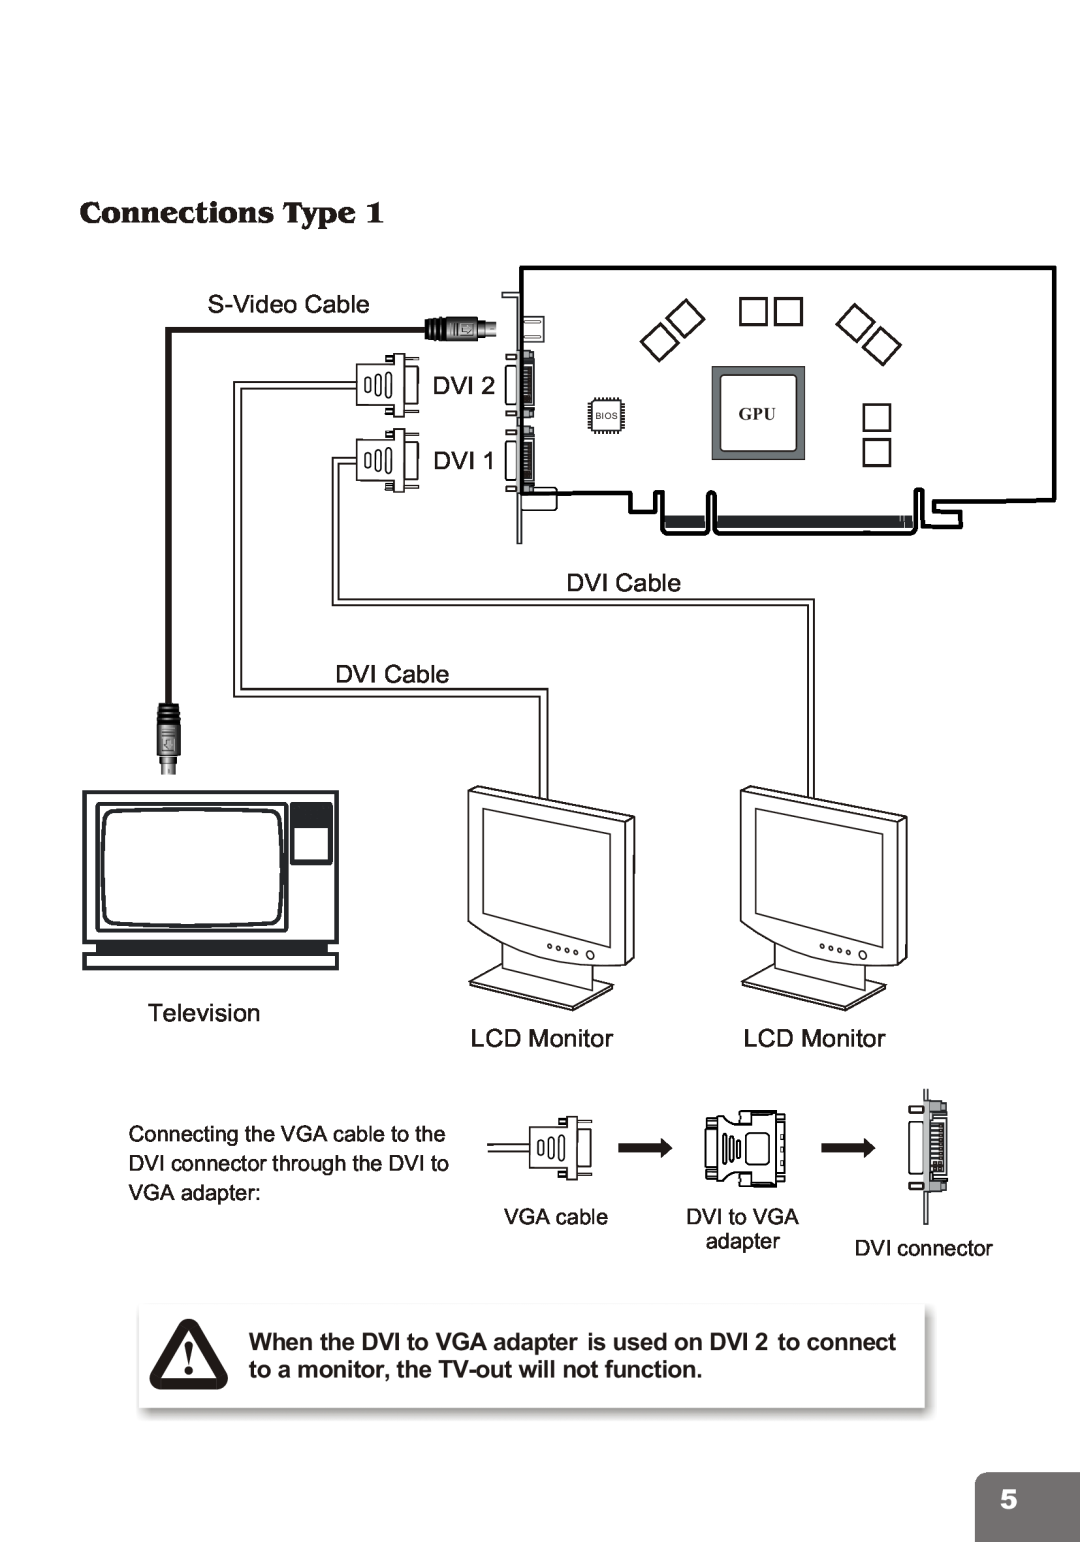 Nvidia PCI Express Series user manual Connections Type, DVI to VGA, adapter, DVI connector, Bios 